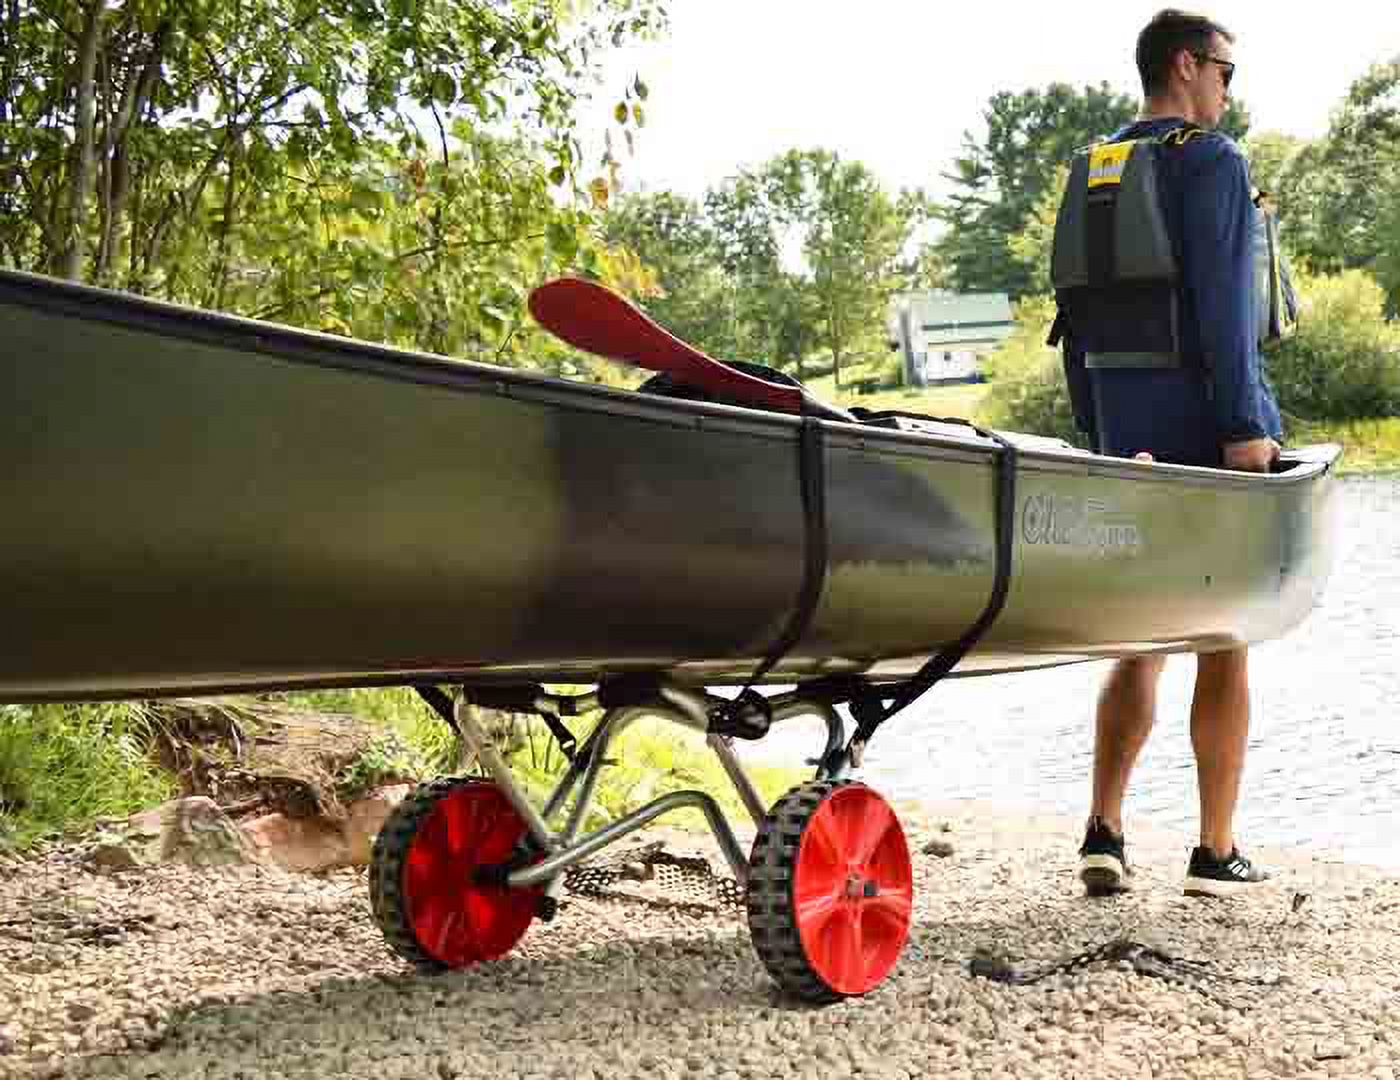 Malone ClipperTRX Deluxe Kayak/Canoe Cart with No-Flat Tires - image 4 of 5